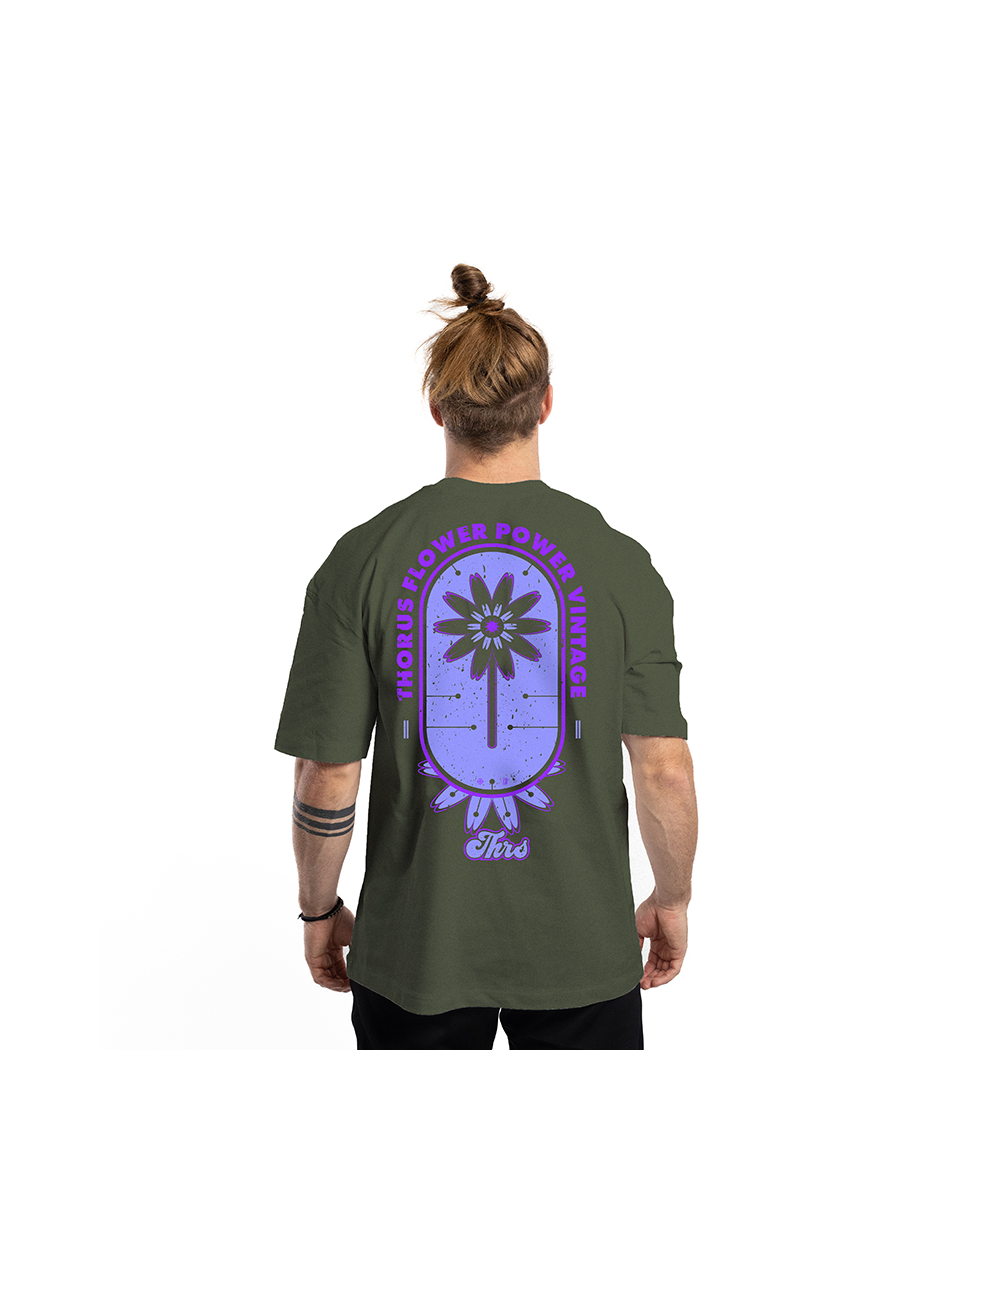 MEN'S MILITARY GREEN OVERSIZE FLOWER POWER T-SHIRT LIMITED EDITION